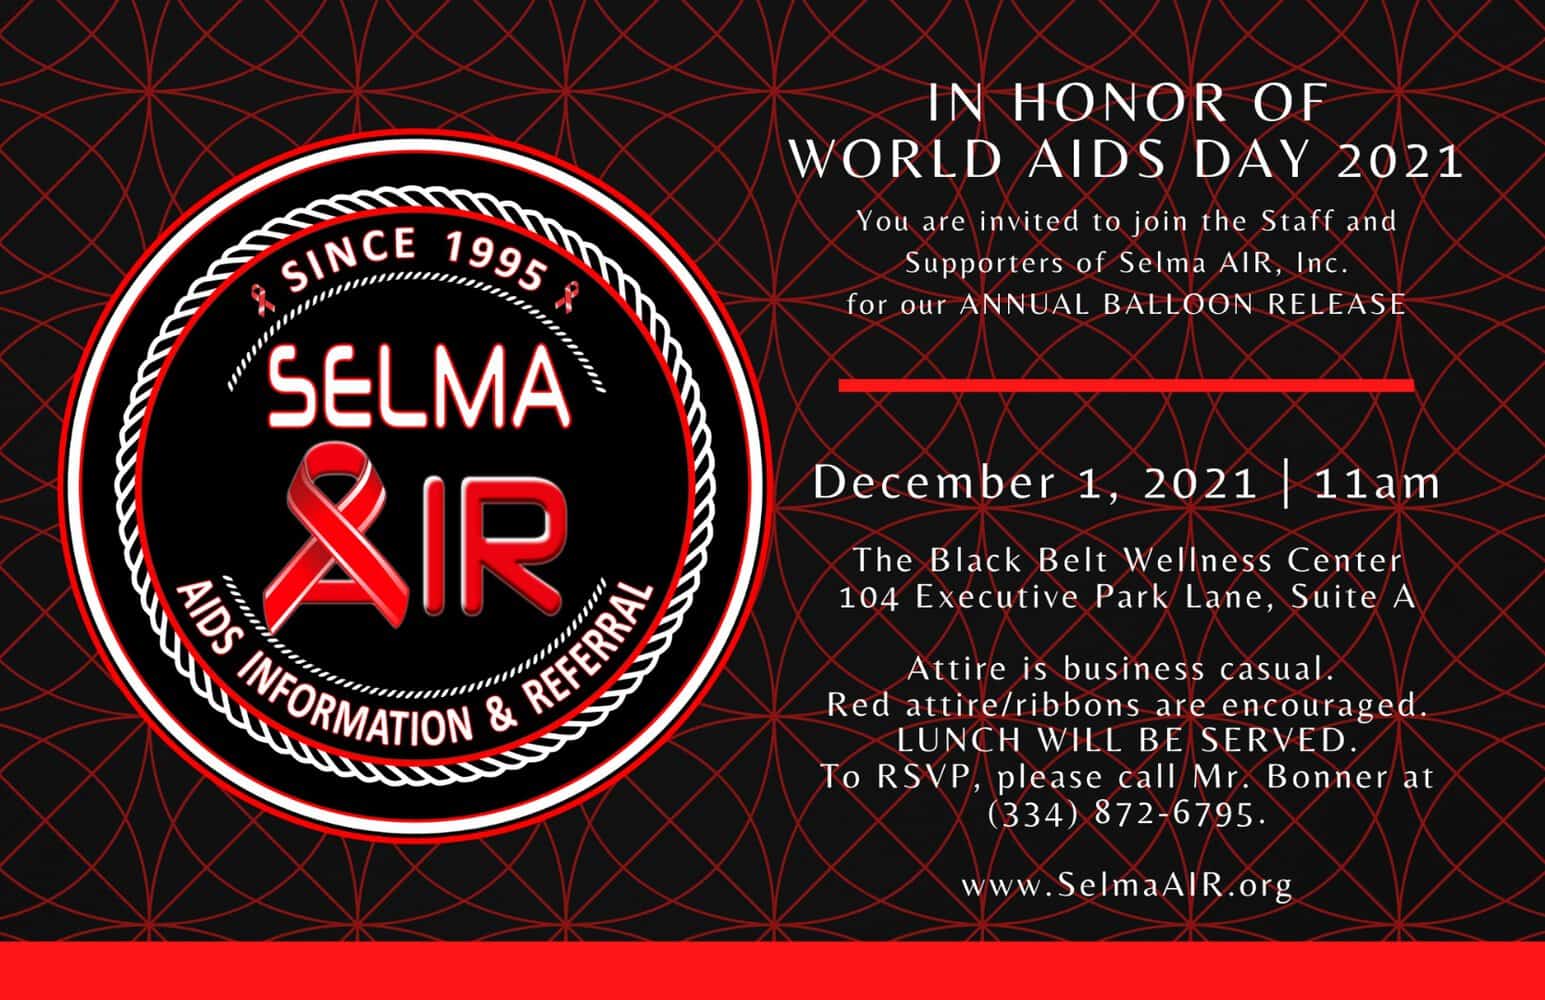 Resized_in_honor_of_world_aids_day_2021_2_002.jpeg